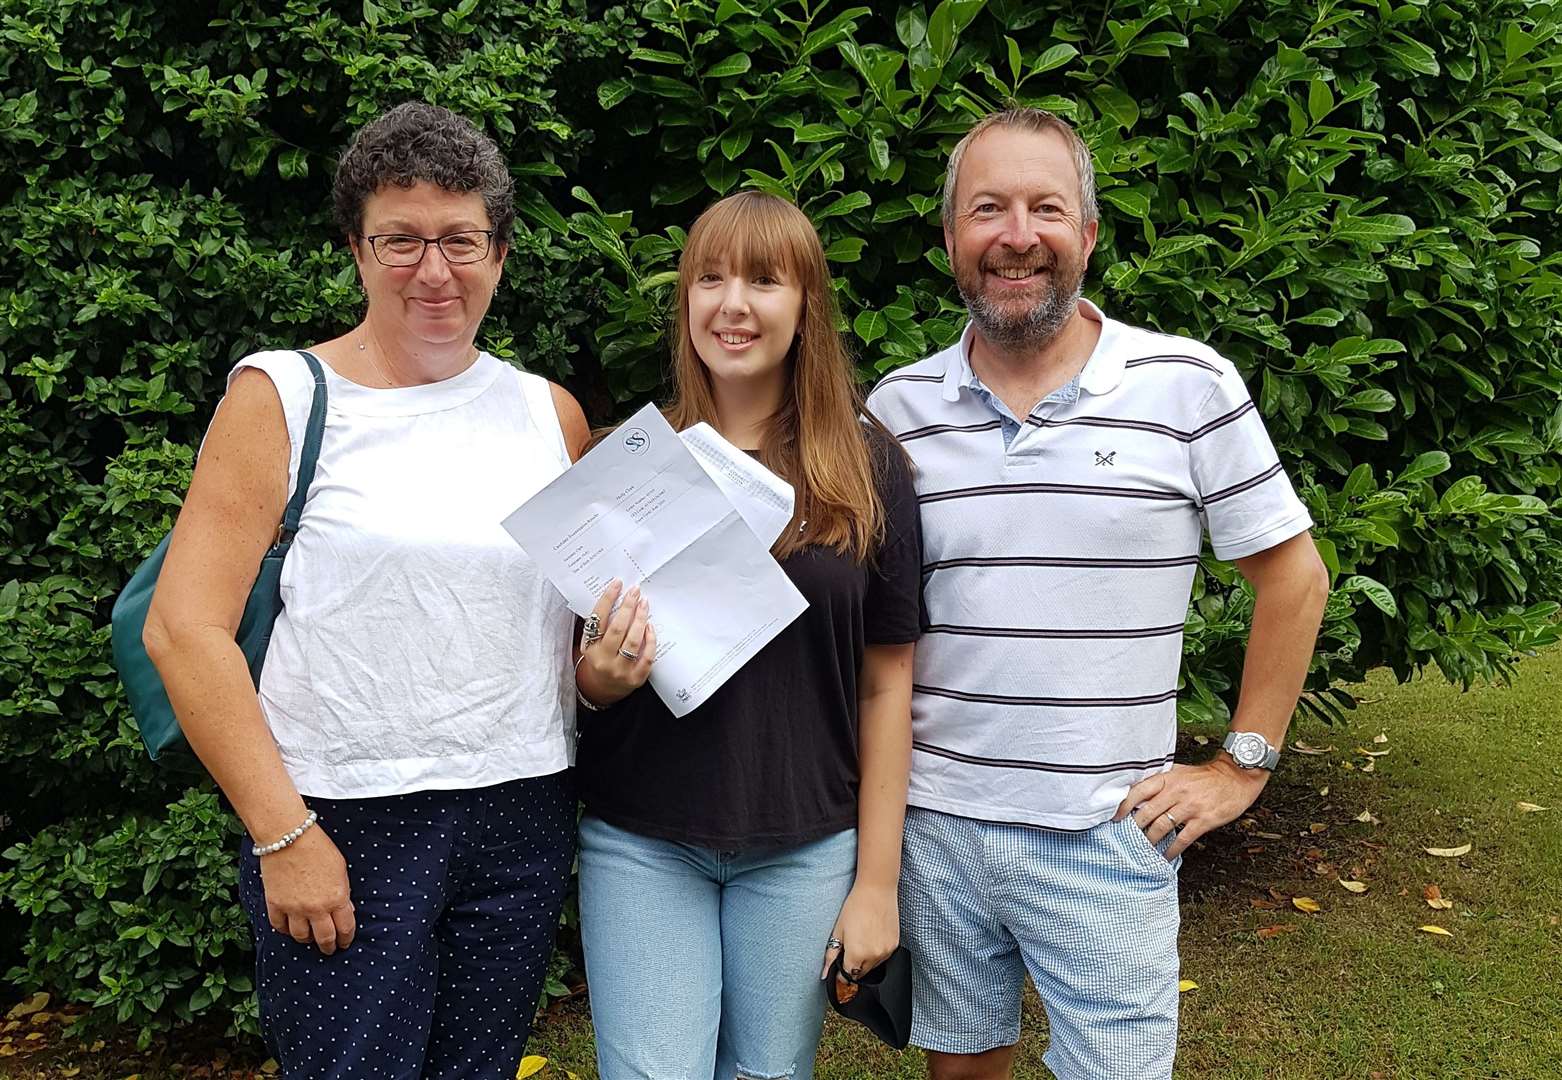 Holly Clark from Sutton Valence School, pictured with her mum Marie and dad Steven, achieved six 8s and three 9s